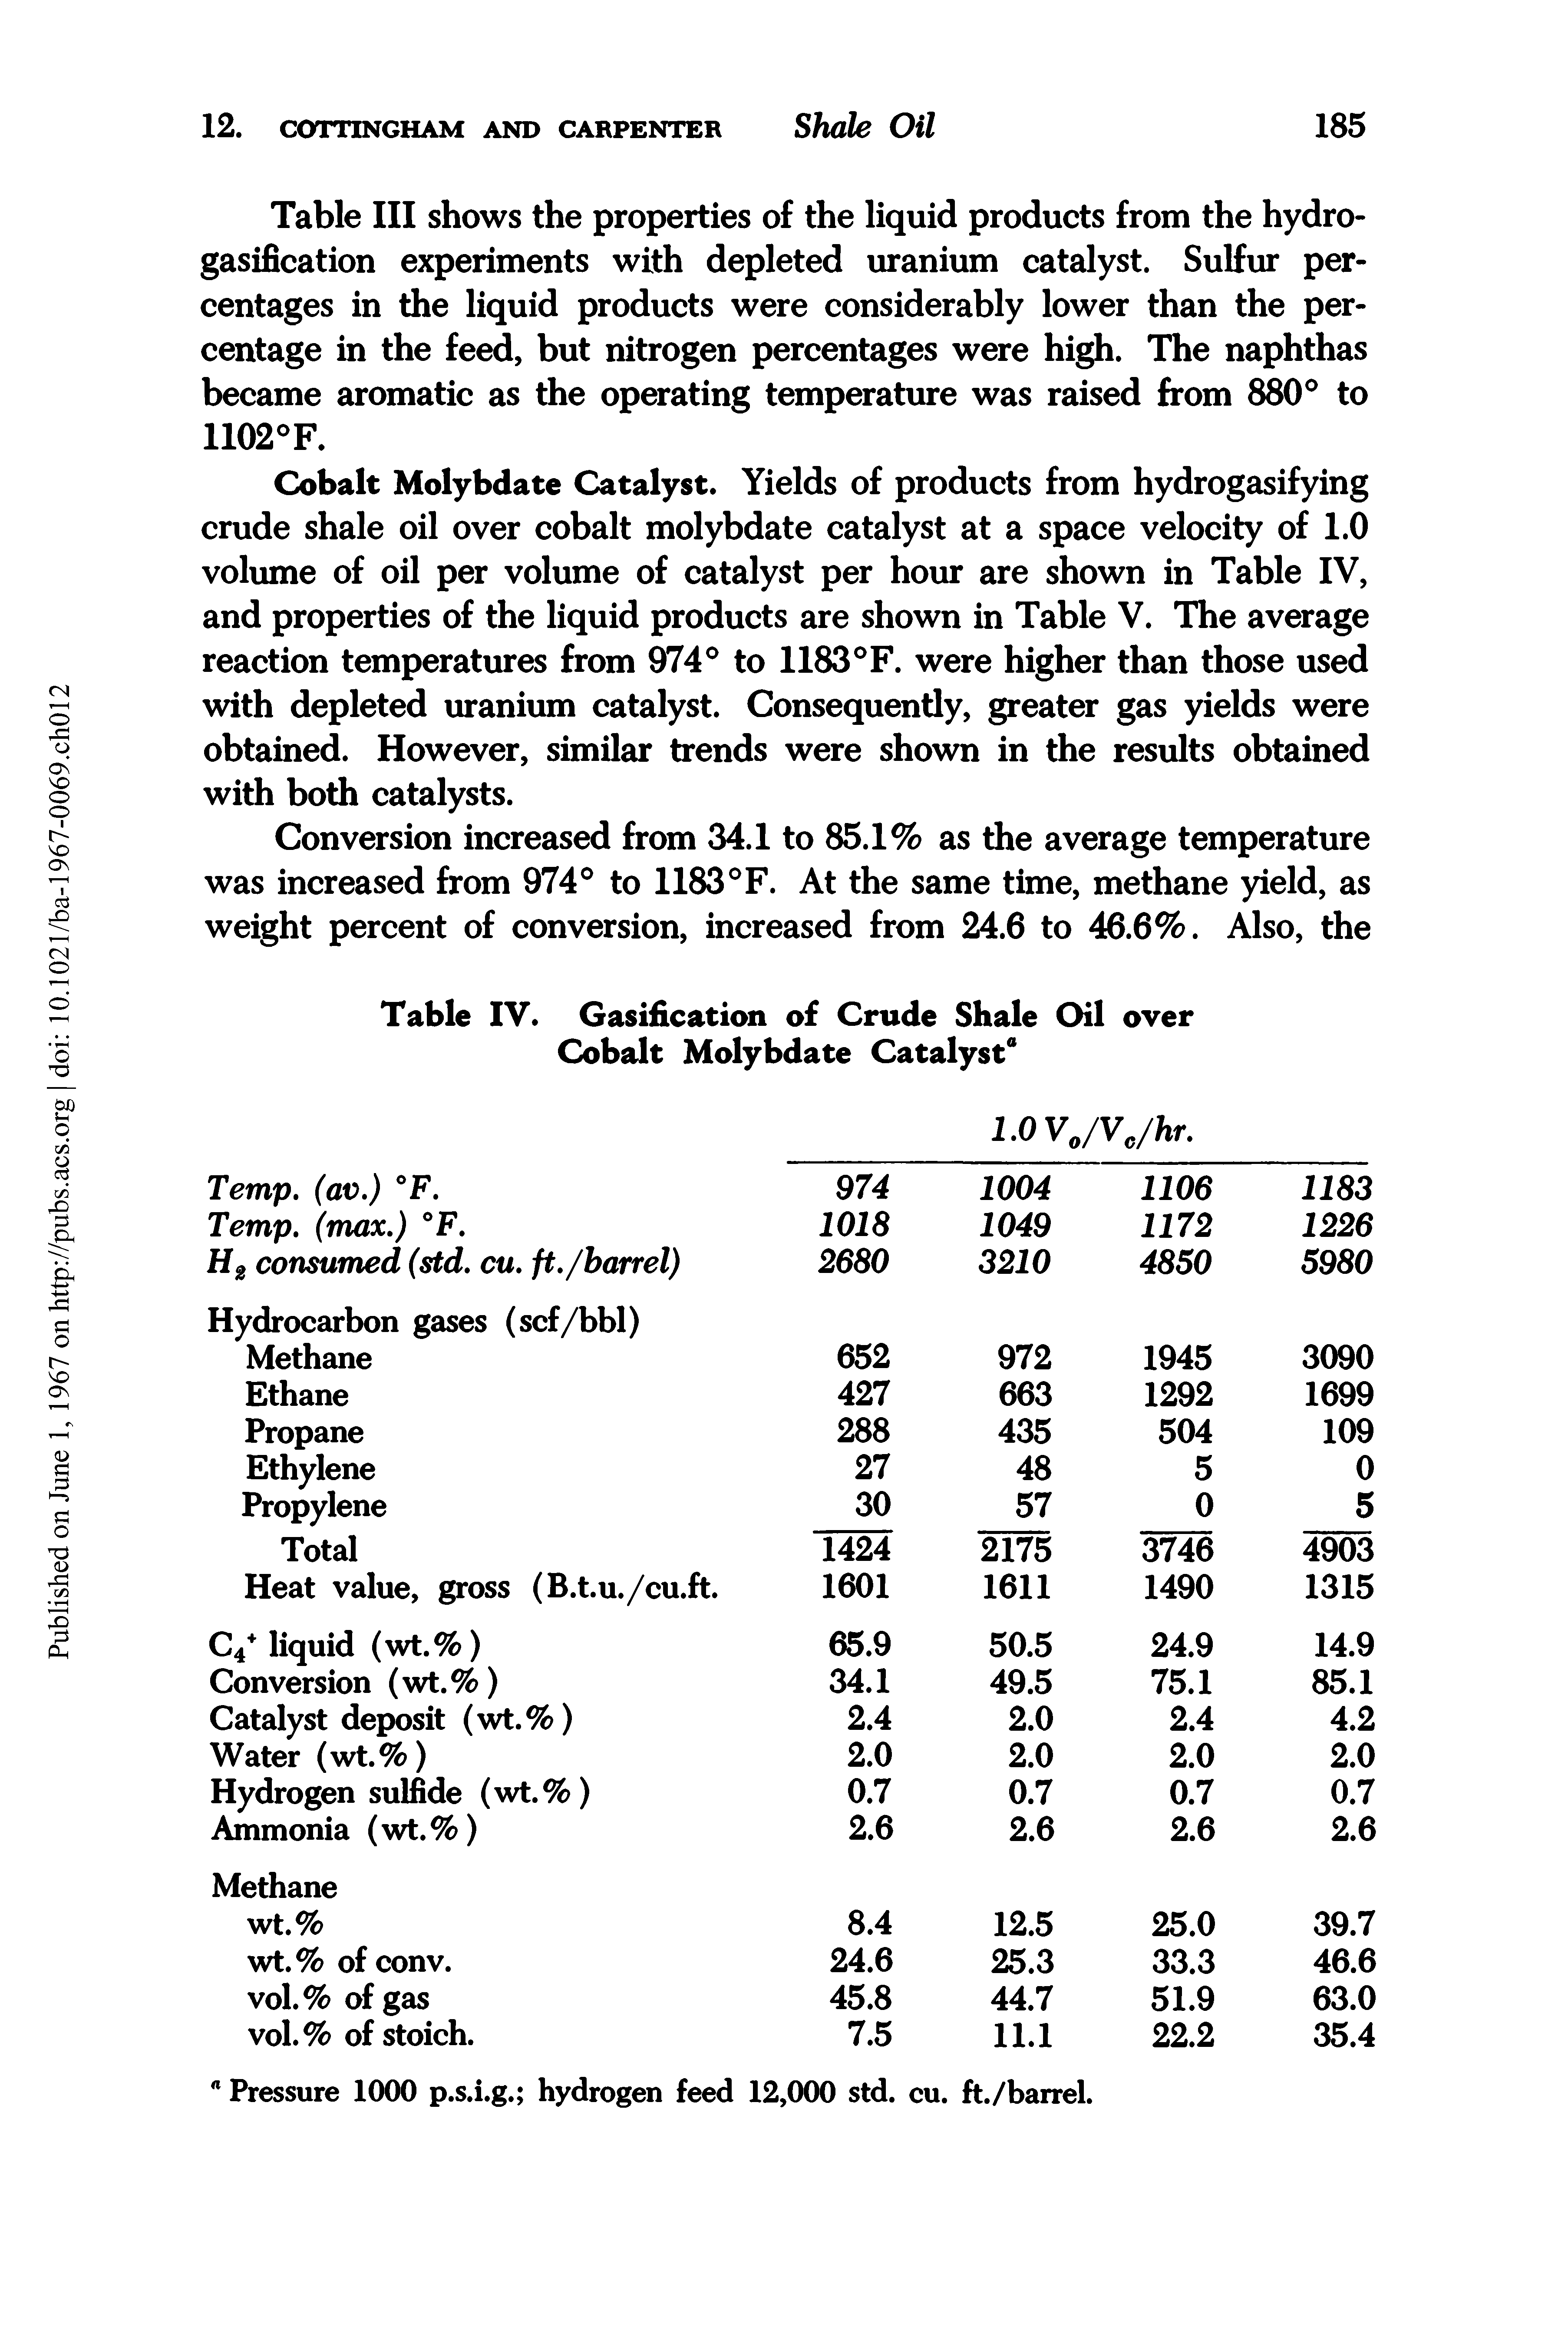 Table III shows the properties of the liquid products from the hydrogasification experiments with depleted uranium catalyst. Sulfur percentages in the liquid products were considerably lower than the percentage in the feed, but nitrogen percentages were high. The naphthas became aromatic as the operating temperature was raised from 880° to 1102°F.